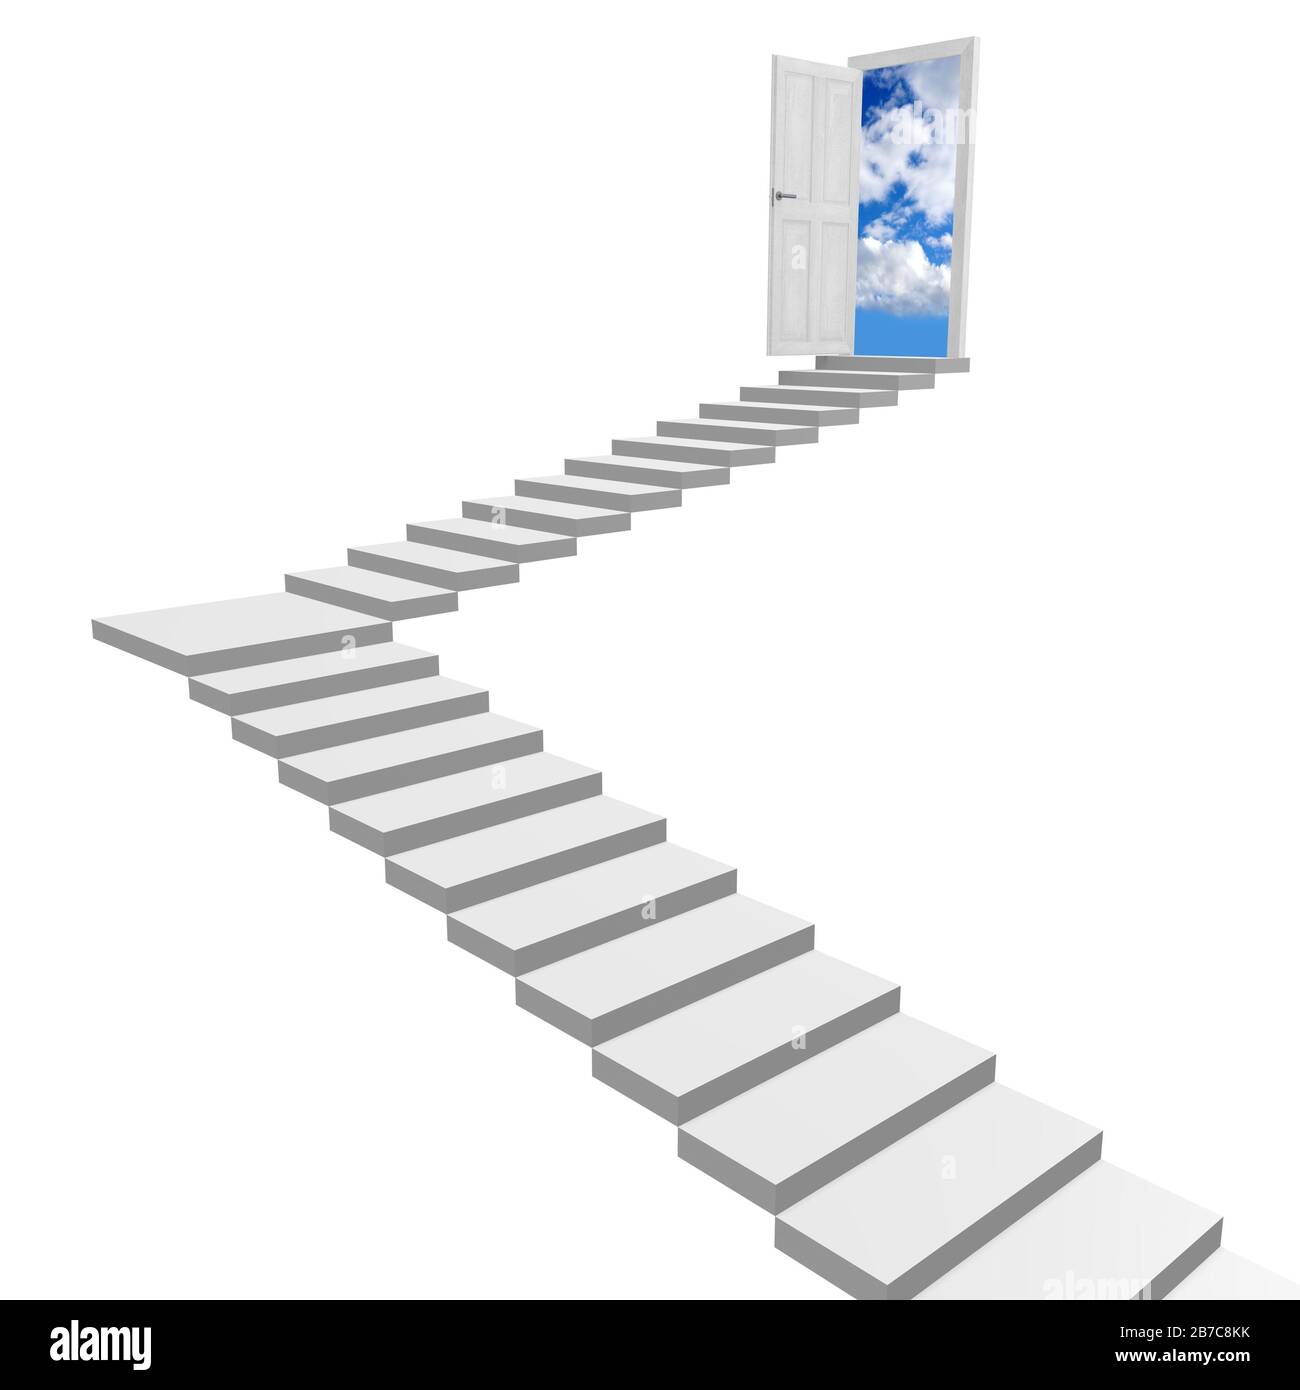 Stairway To Heaven Images – Browse 1,970 Stock Photos, Vectors